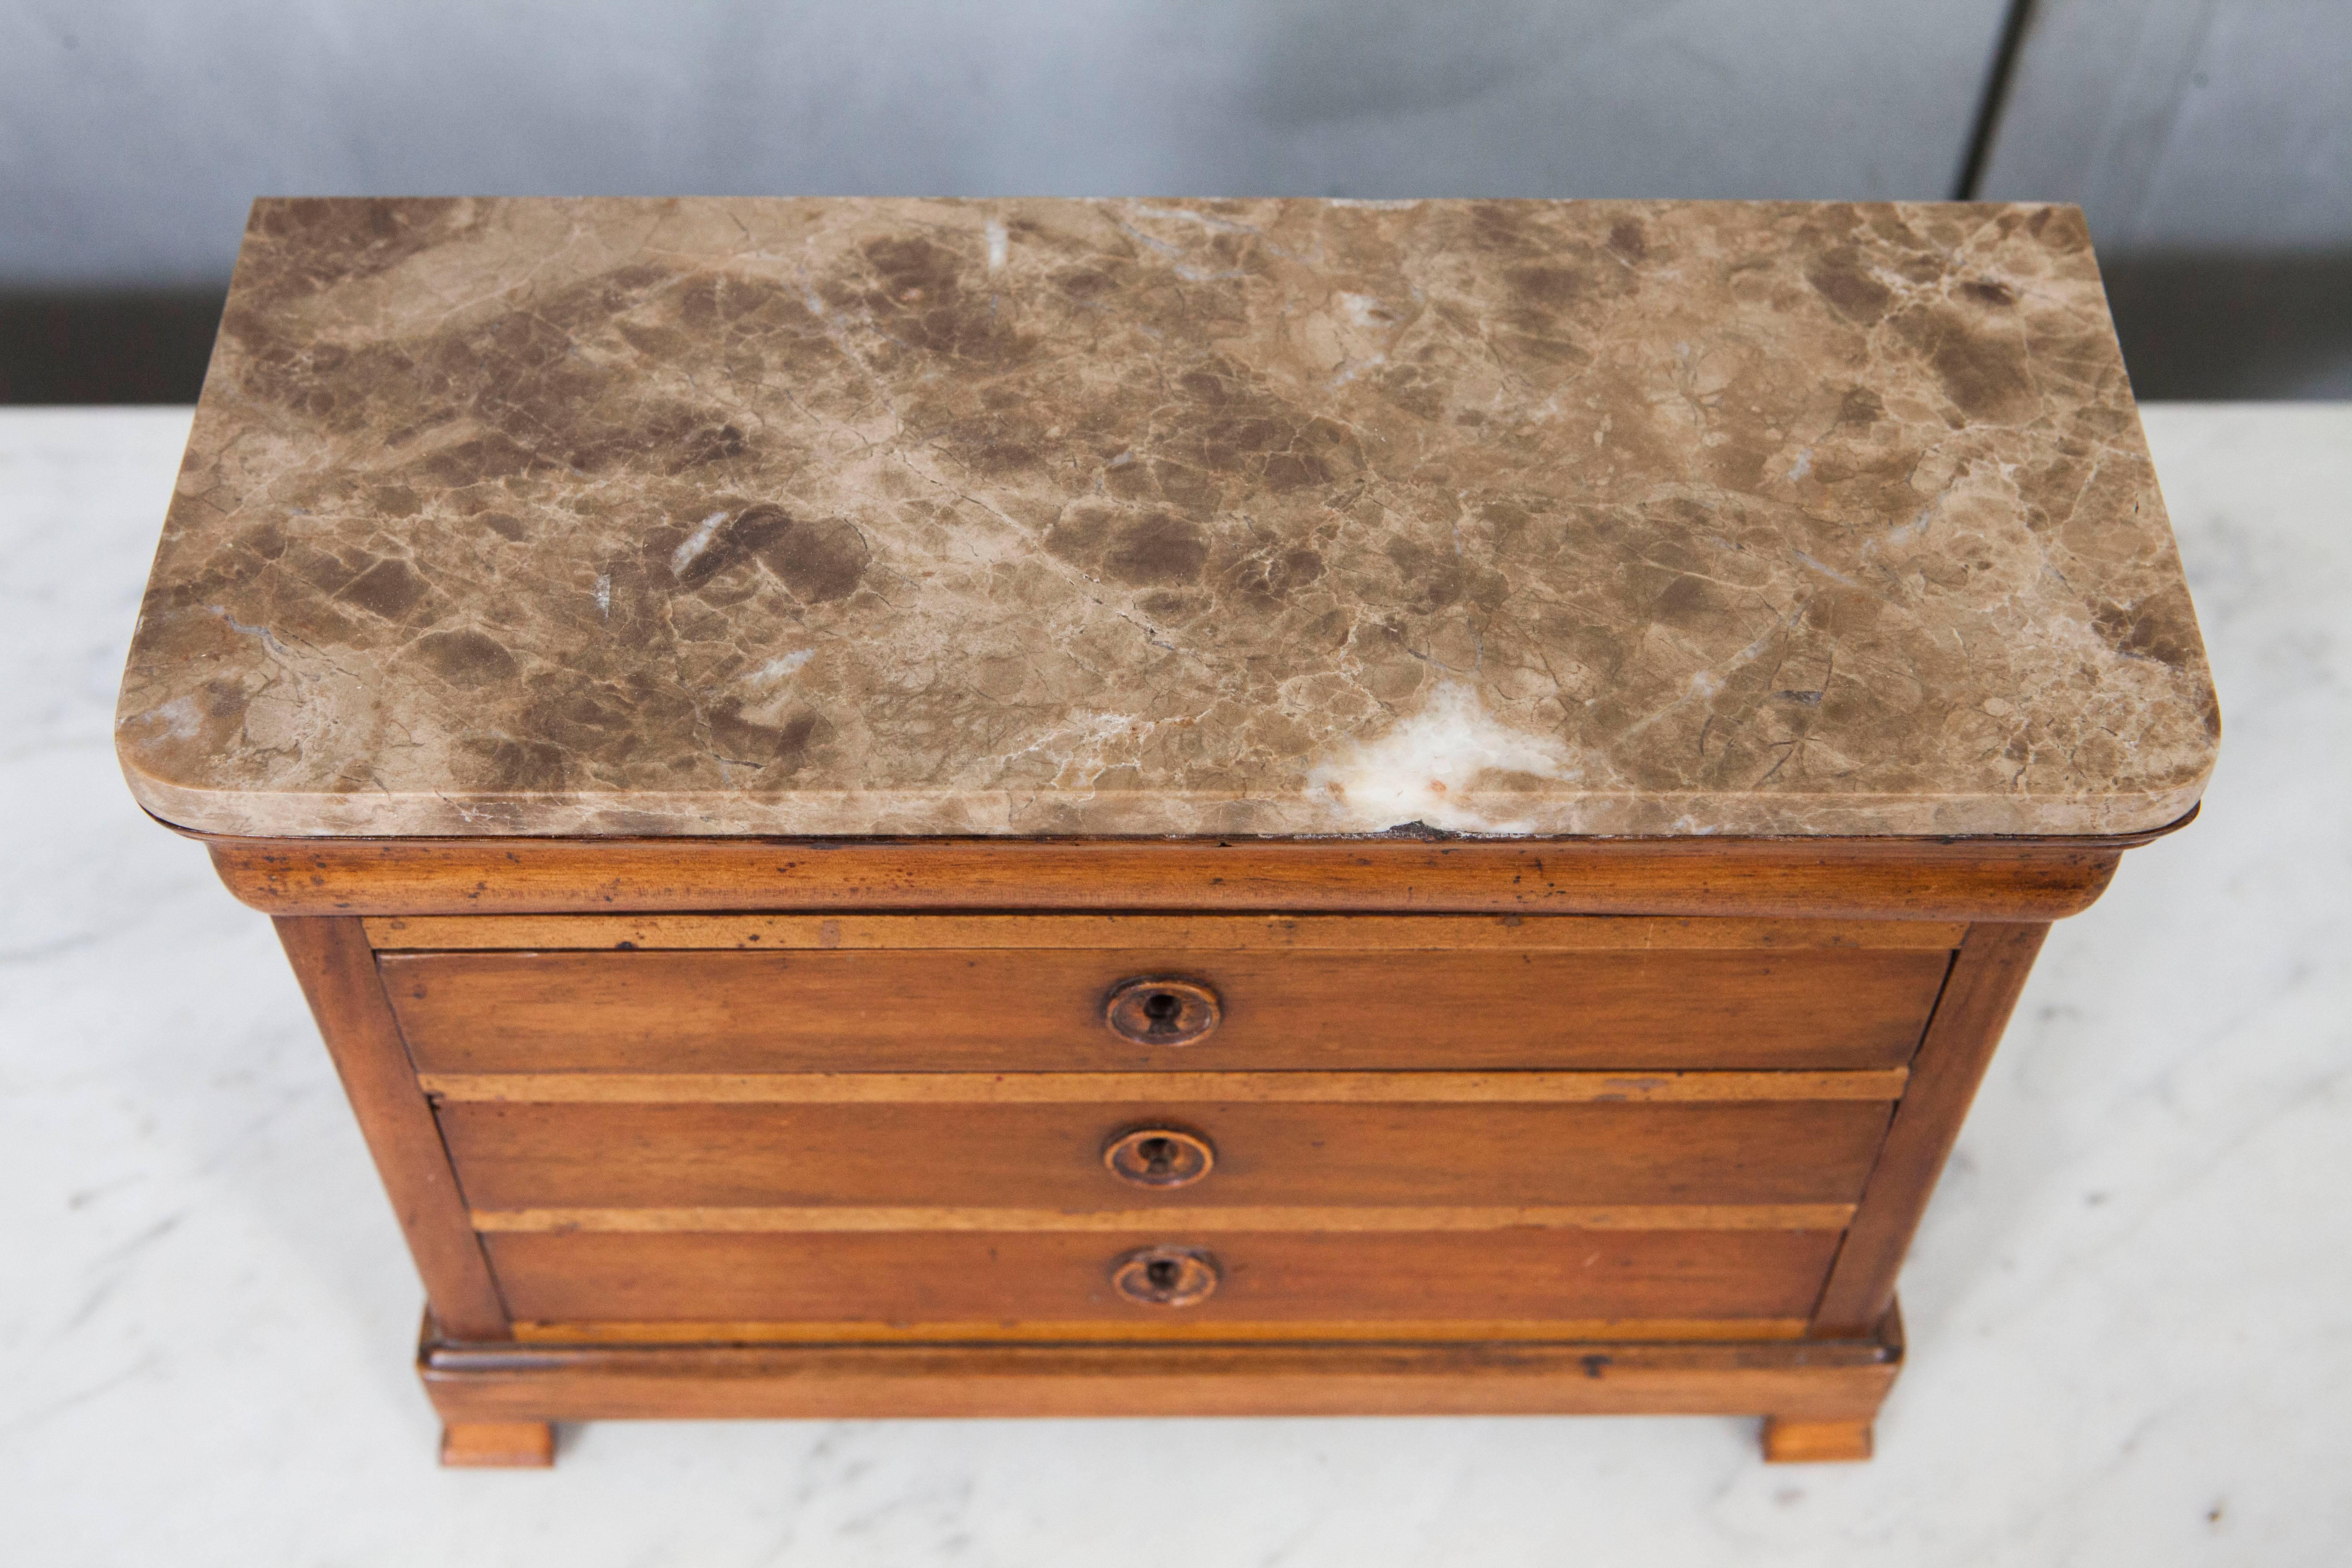 This handsome miniature chest of drawers has a marble top, pedestal feet and wooden escutcheons. The piece has dovetail construction and brass locks.